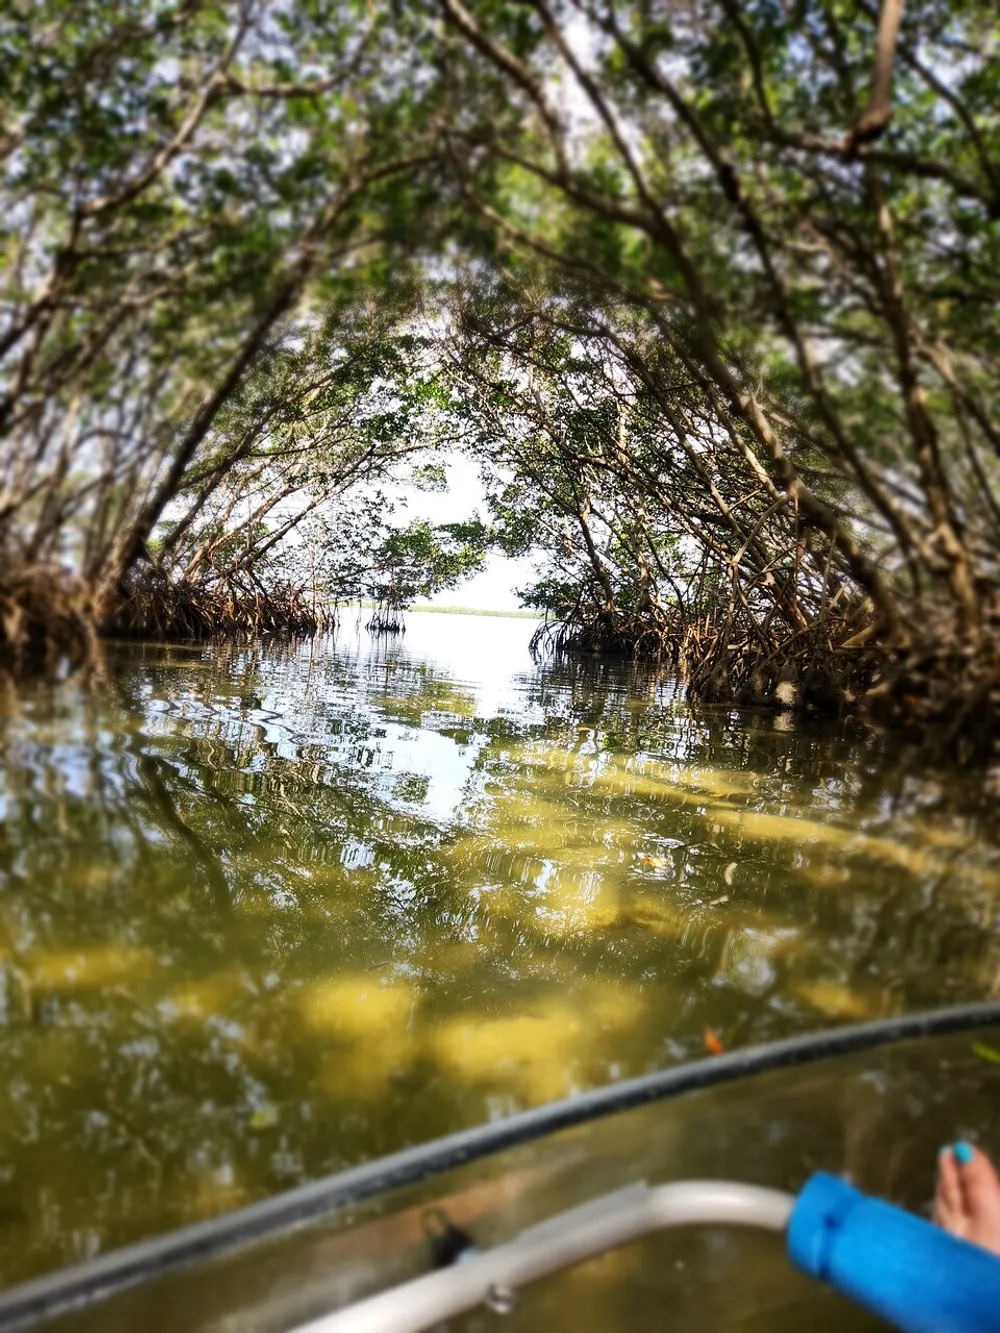 The image shows a waterway framed by an arch of mangrove trees with the perspective taken from a boat implied by a part of the boat and a persons foot entering the frame